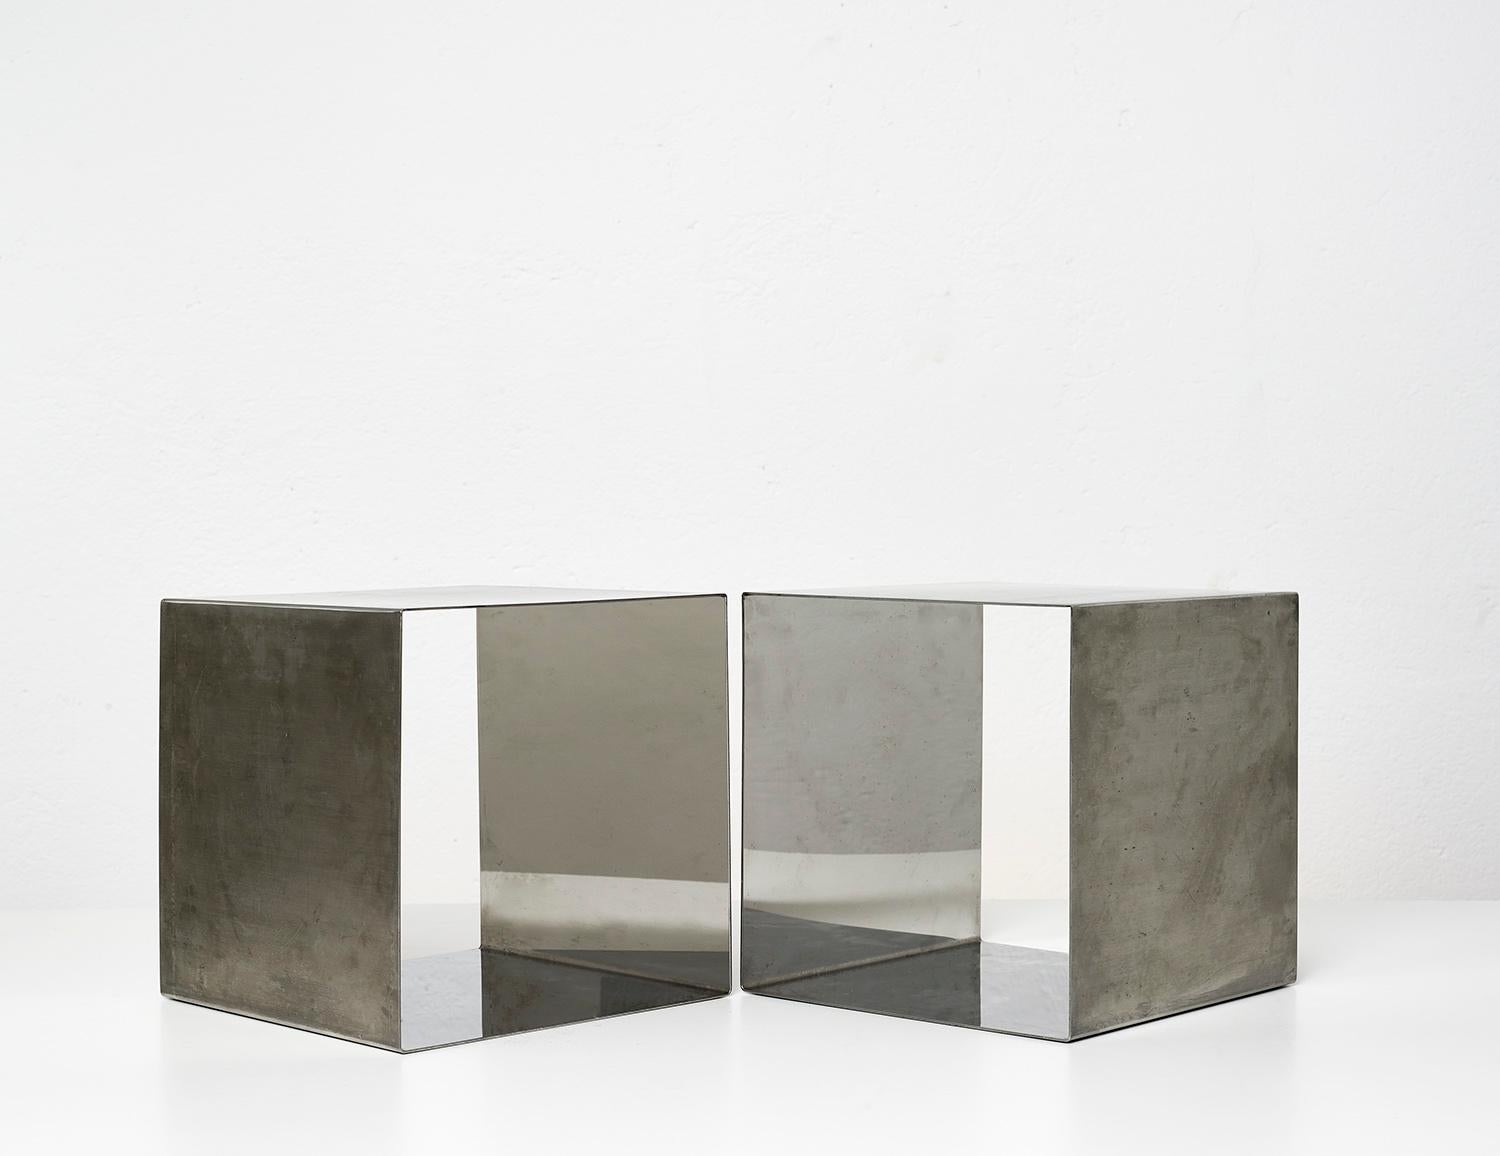 Brushed Pair of Stainless Steel Cube Tables by Maria Pergay for Design Steel France 1968